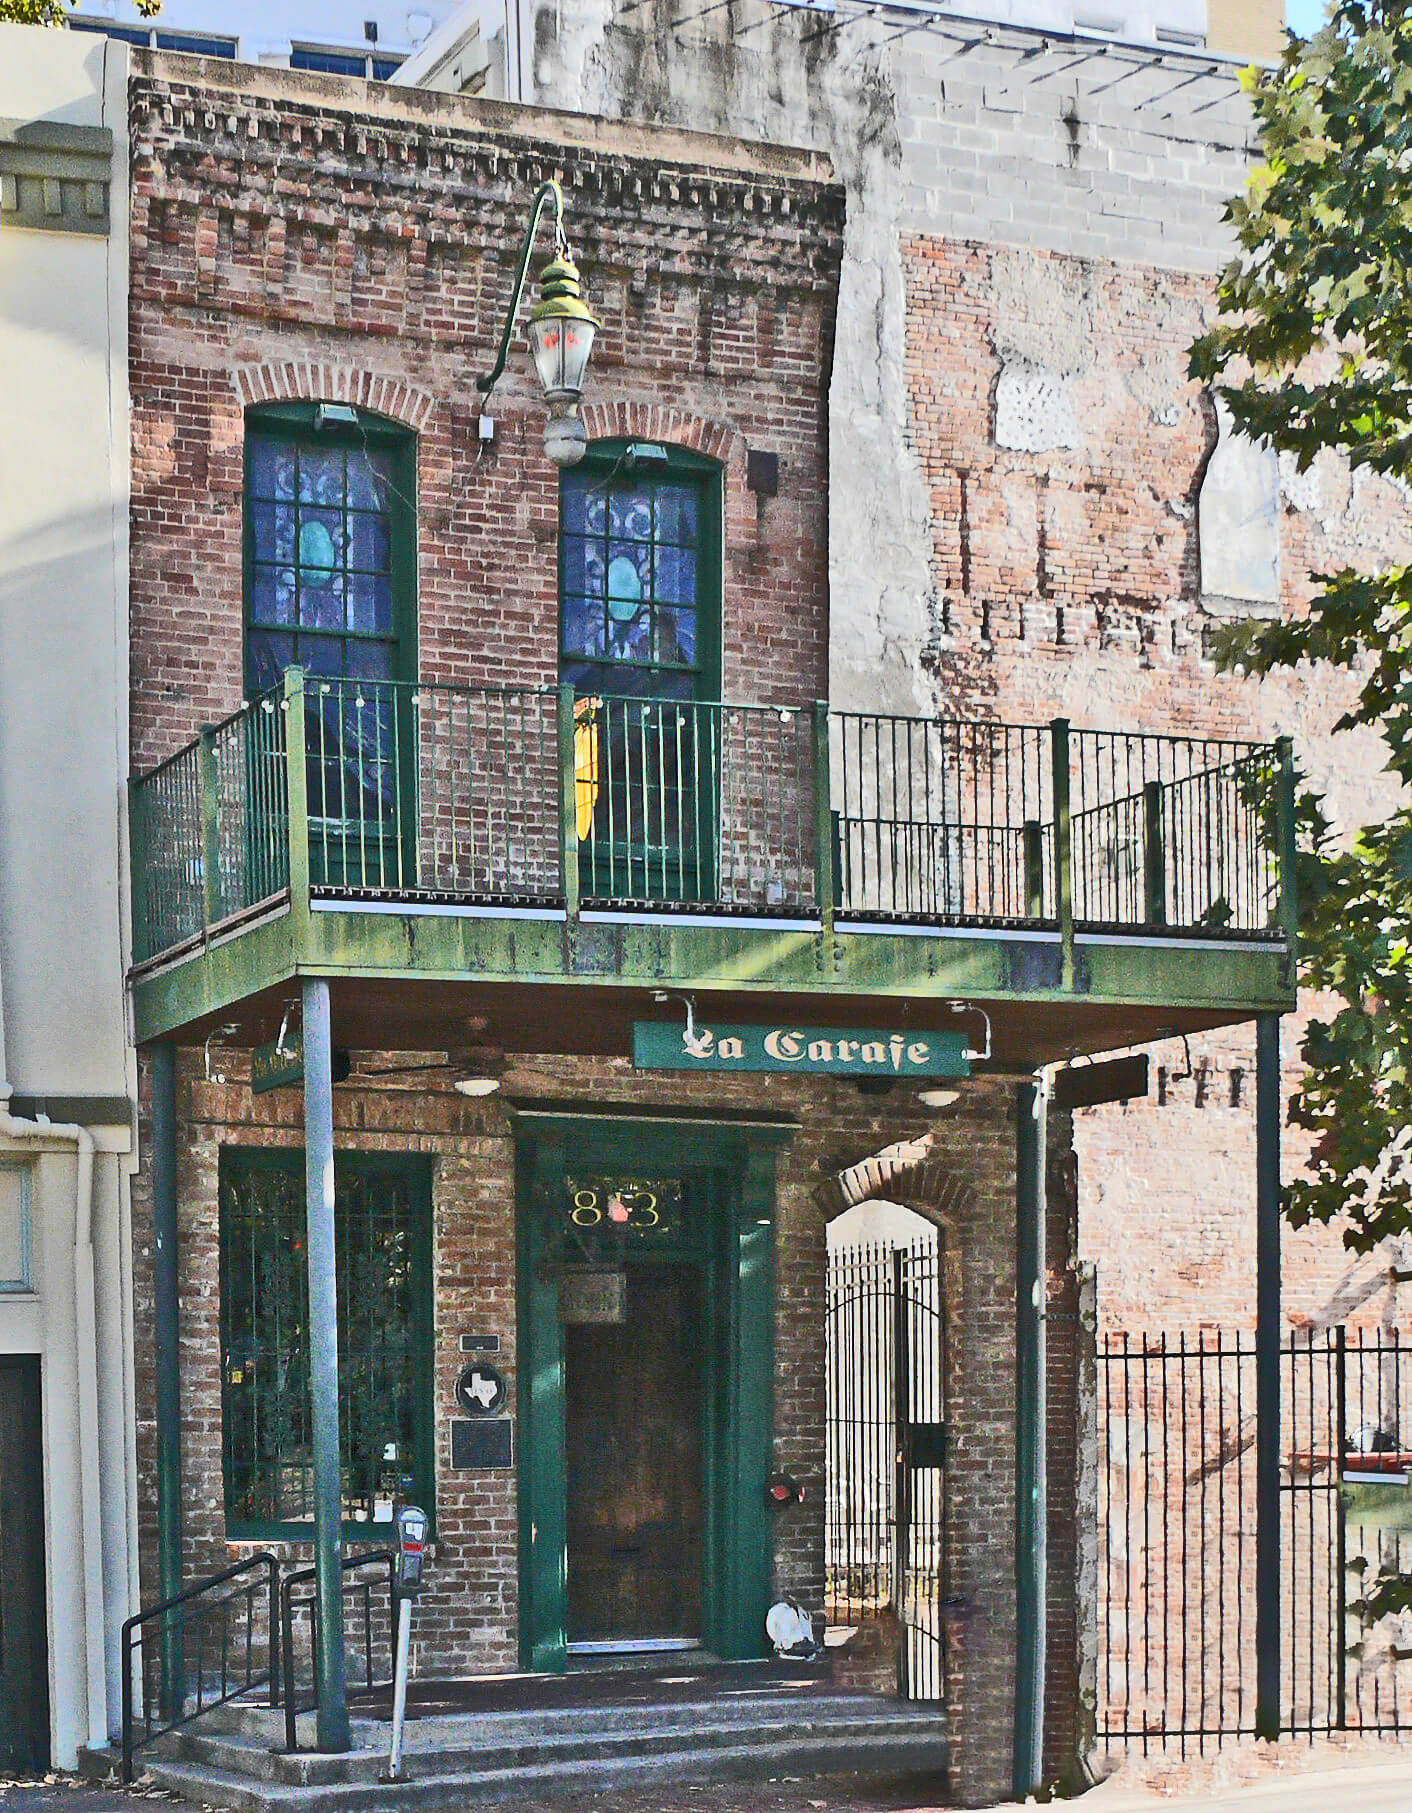 Houston. A narrow brick building with a green metal balcony reaching out from it